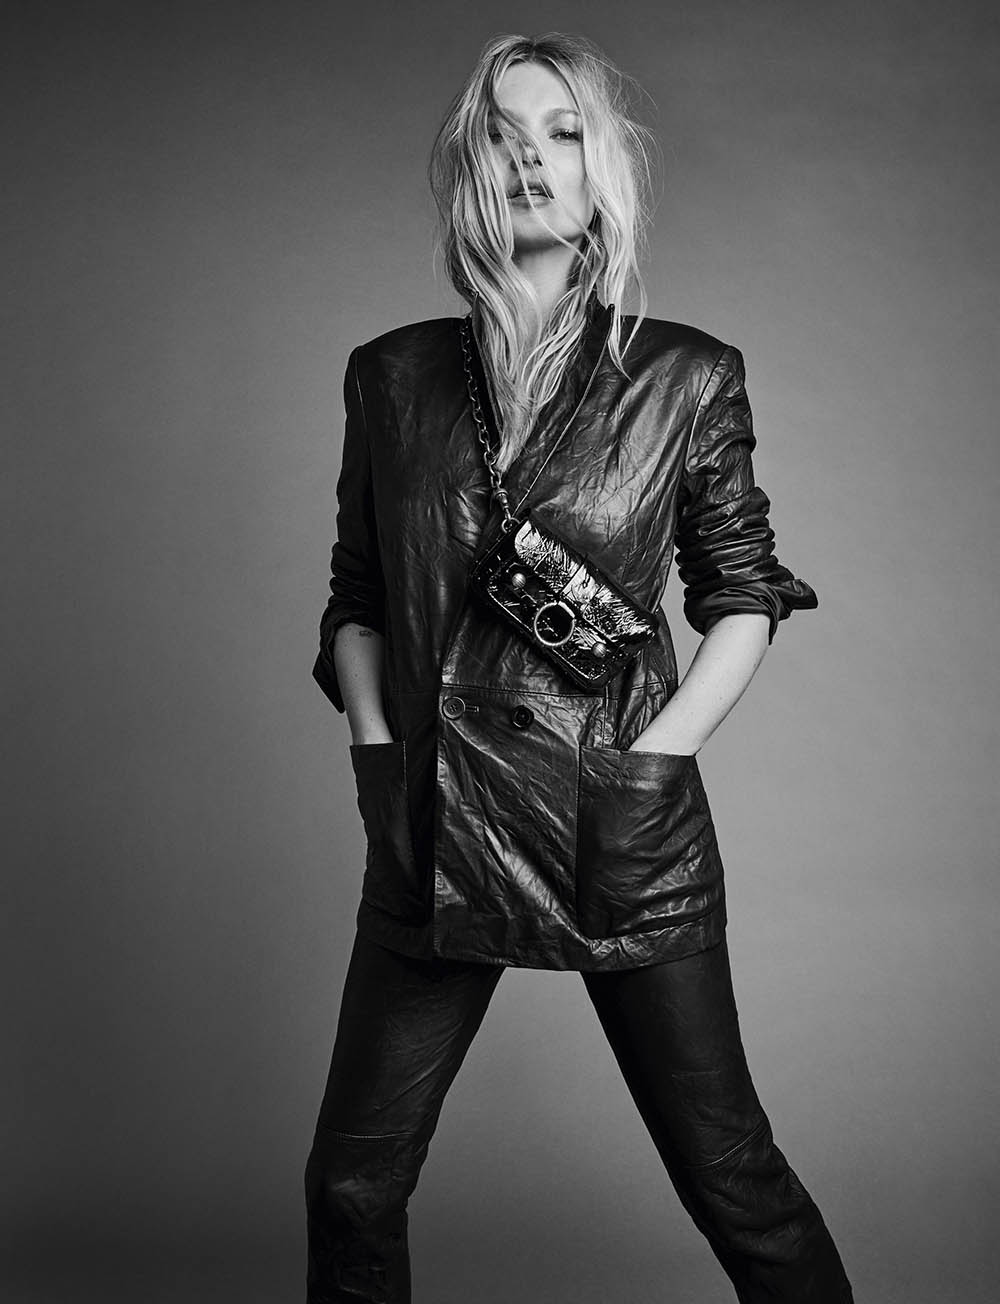 Zadig & Voltaire Spring Summer 2020 Campaign